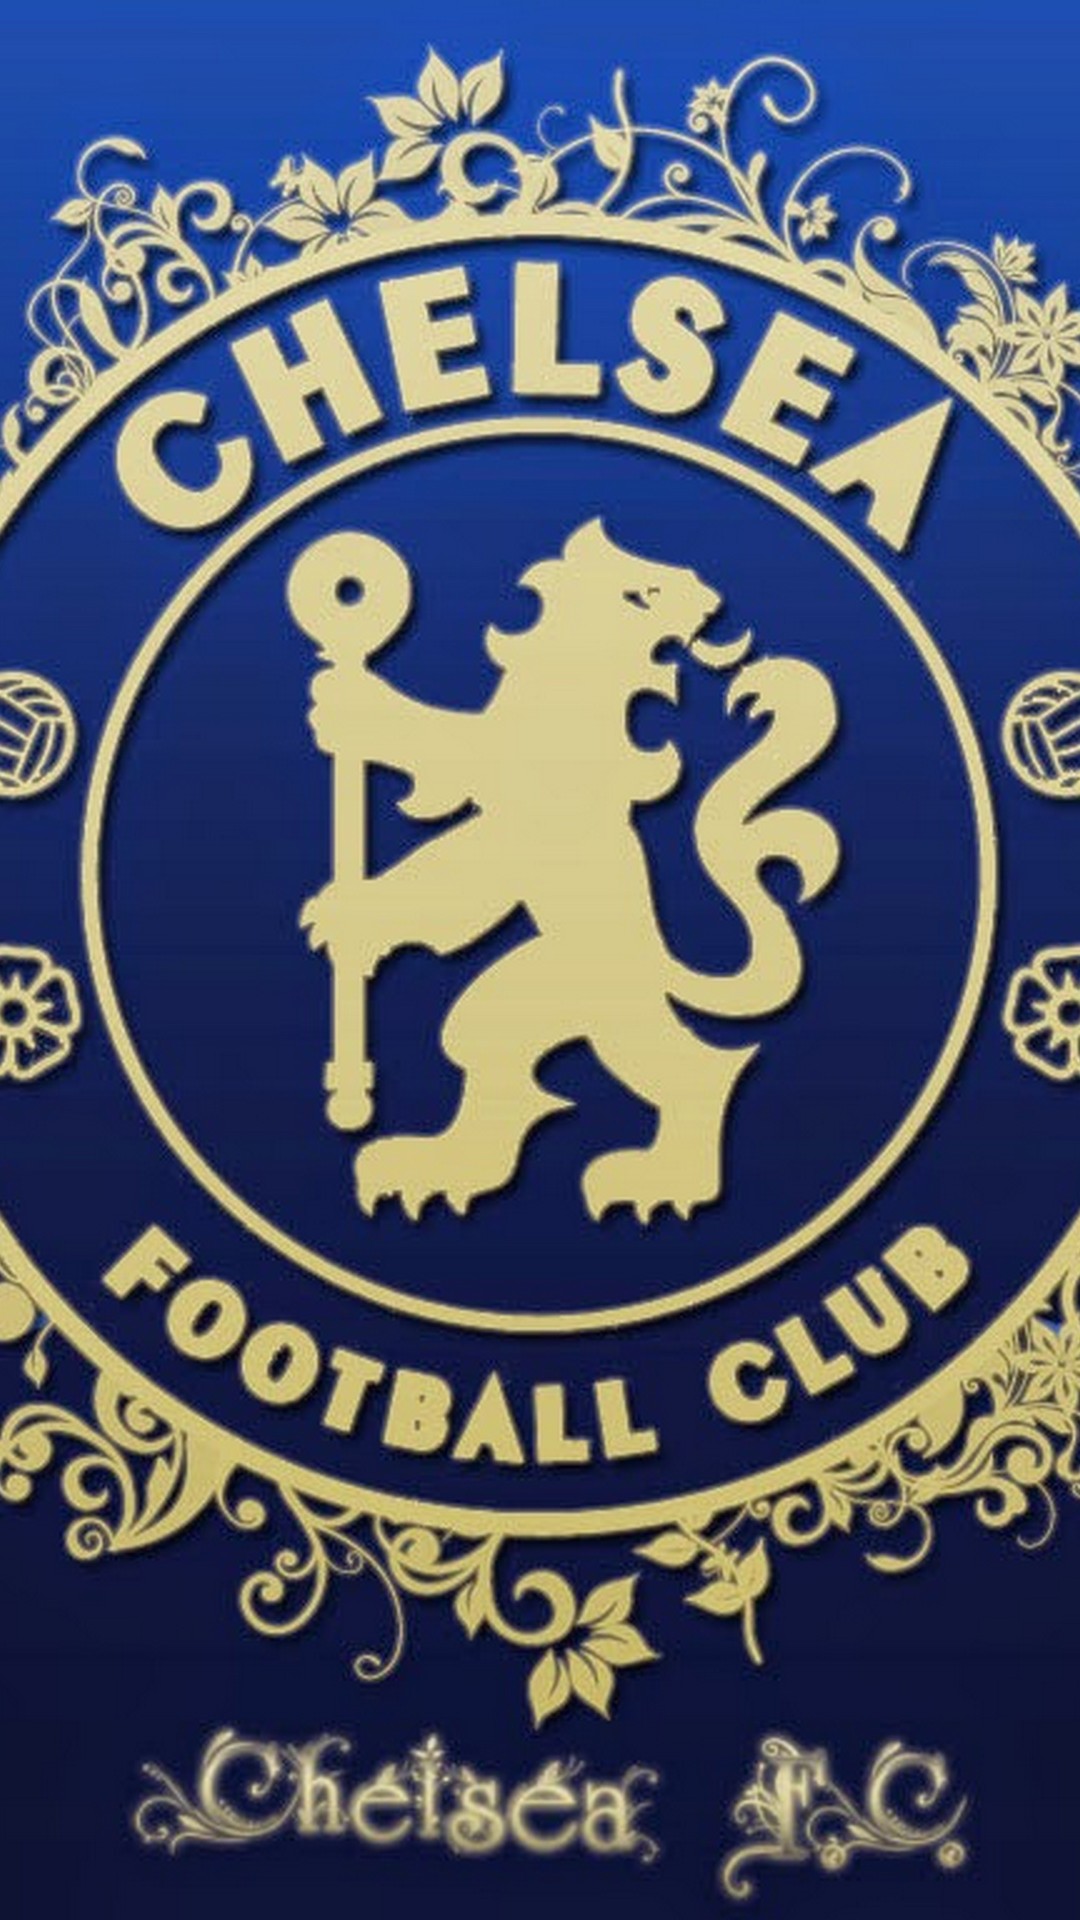 Chelsea Football Club iPhone Wallpapers With Resolution 1080X1920 pixel. You can make this wallpaper for your Mac or Windows Desktop Background, iPhone, Android or Tablet and another Smartphone device for free